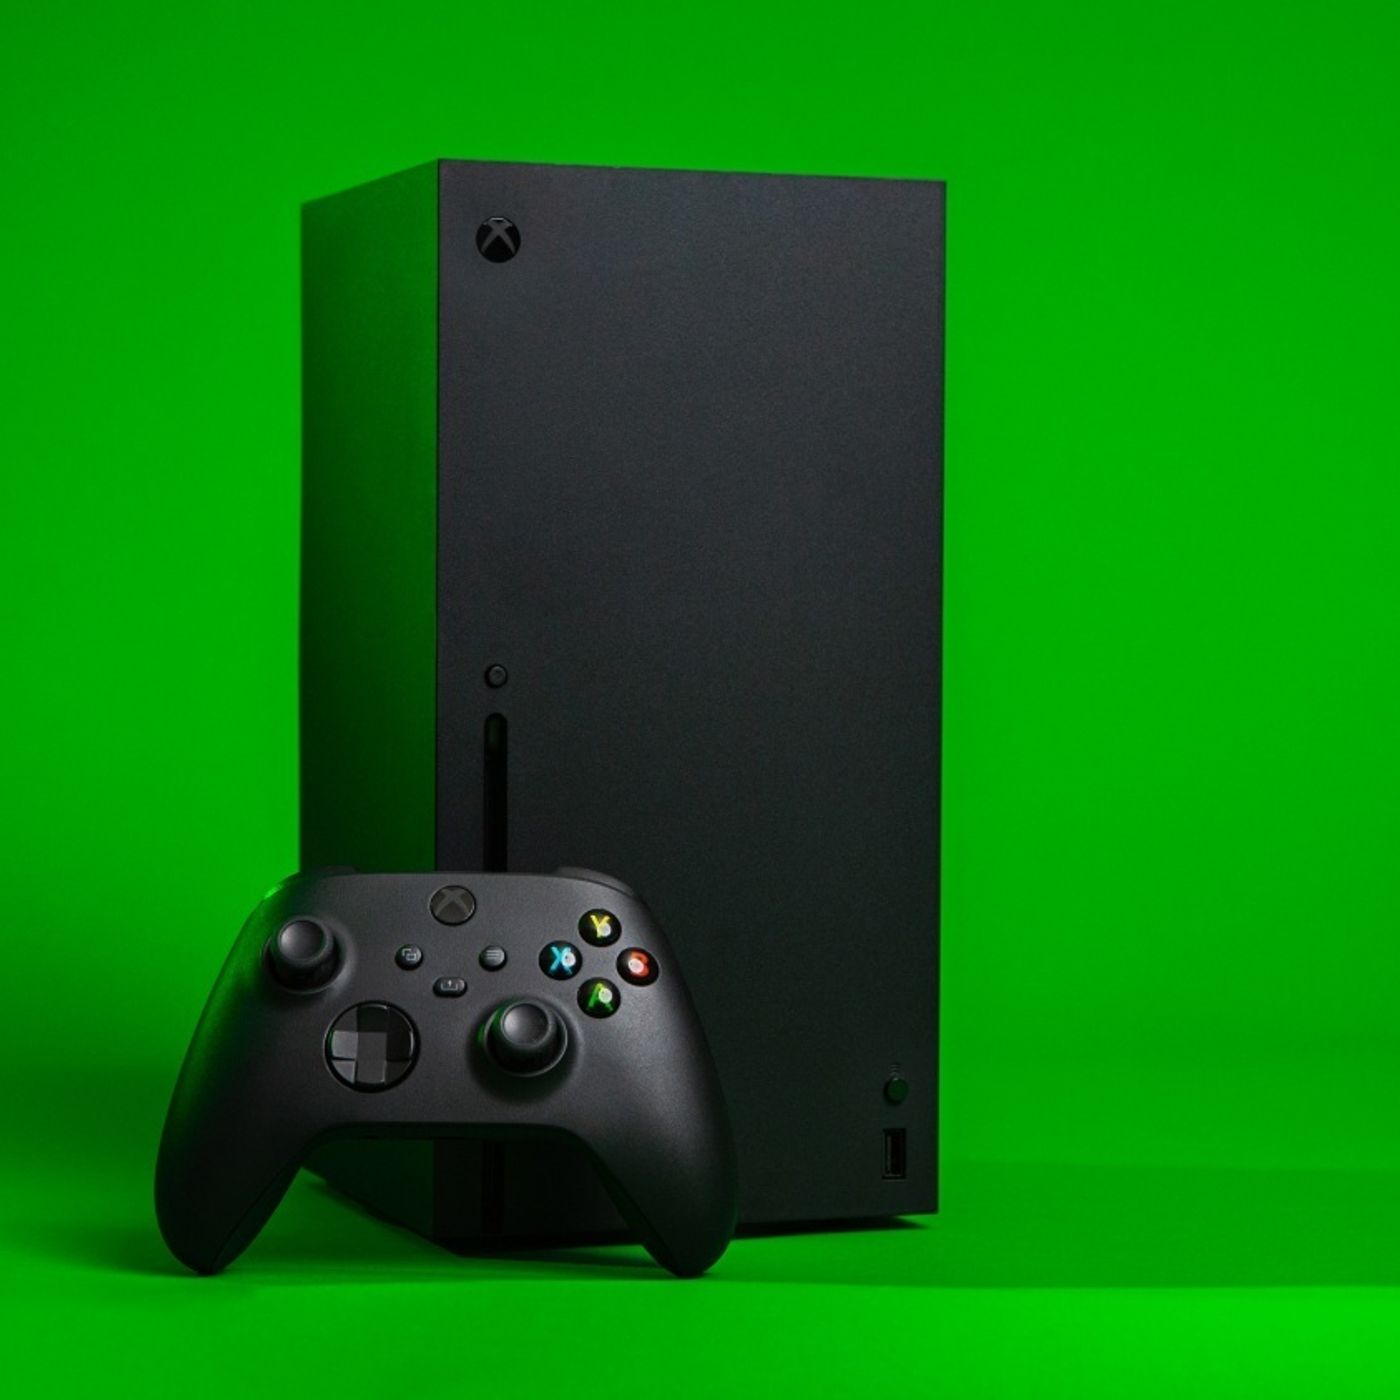 S16 Ep1165: Does Xbox Need a Superhero Exclusive?